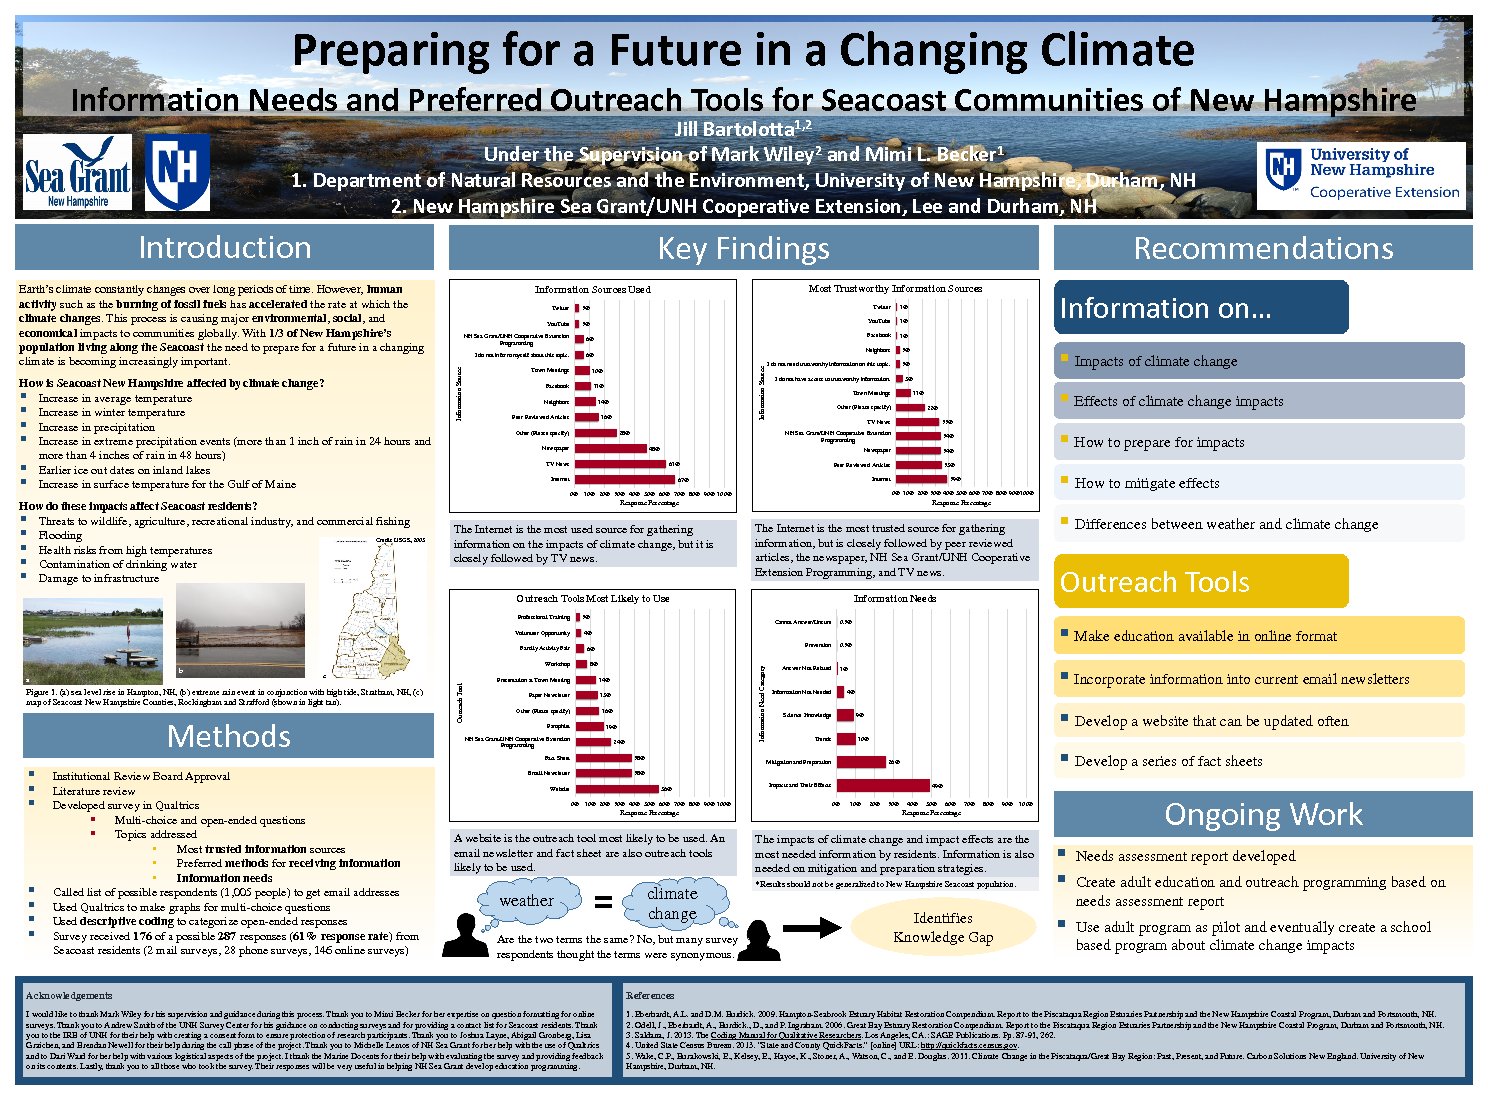 Preparing For A Future In A Changing Climate:Information Needs And Preferred Outreach Tools For Seacoast Communities Of New Hampshire  by jfk23